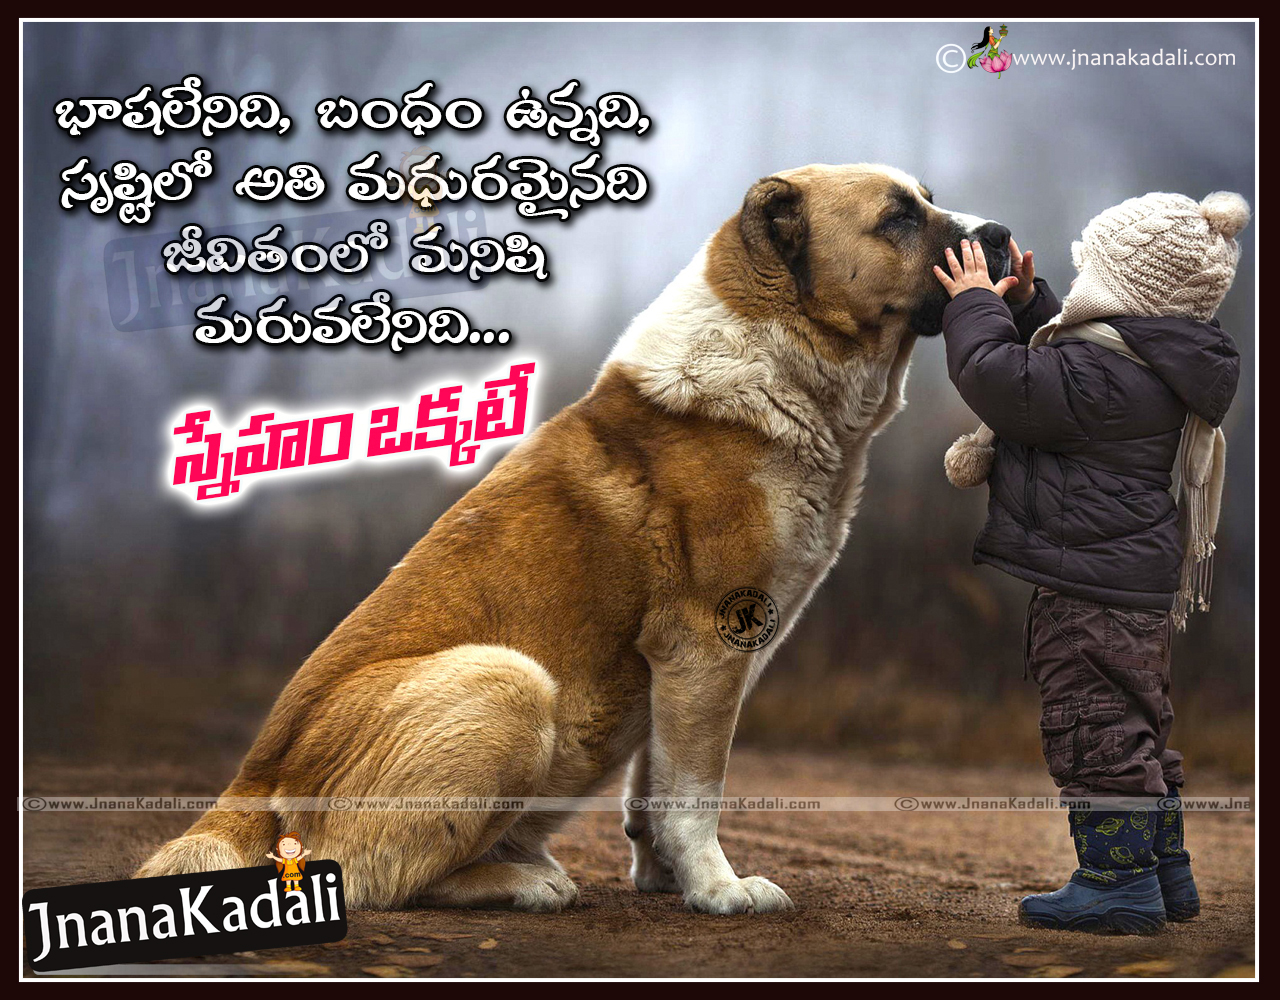 Telugu True Friendship Value Messages With Good Evening Sayings In